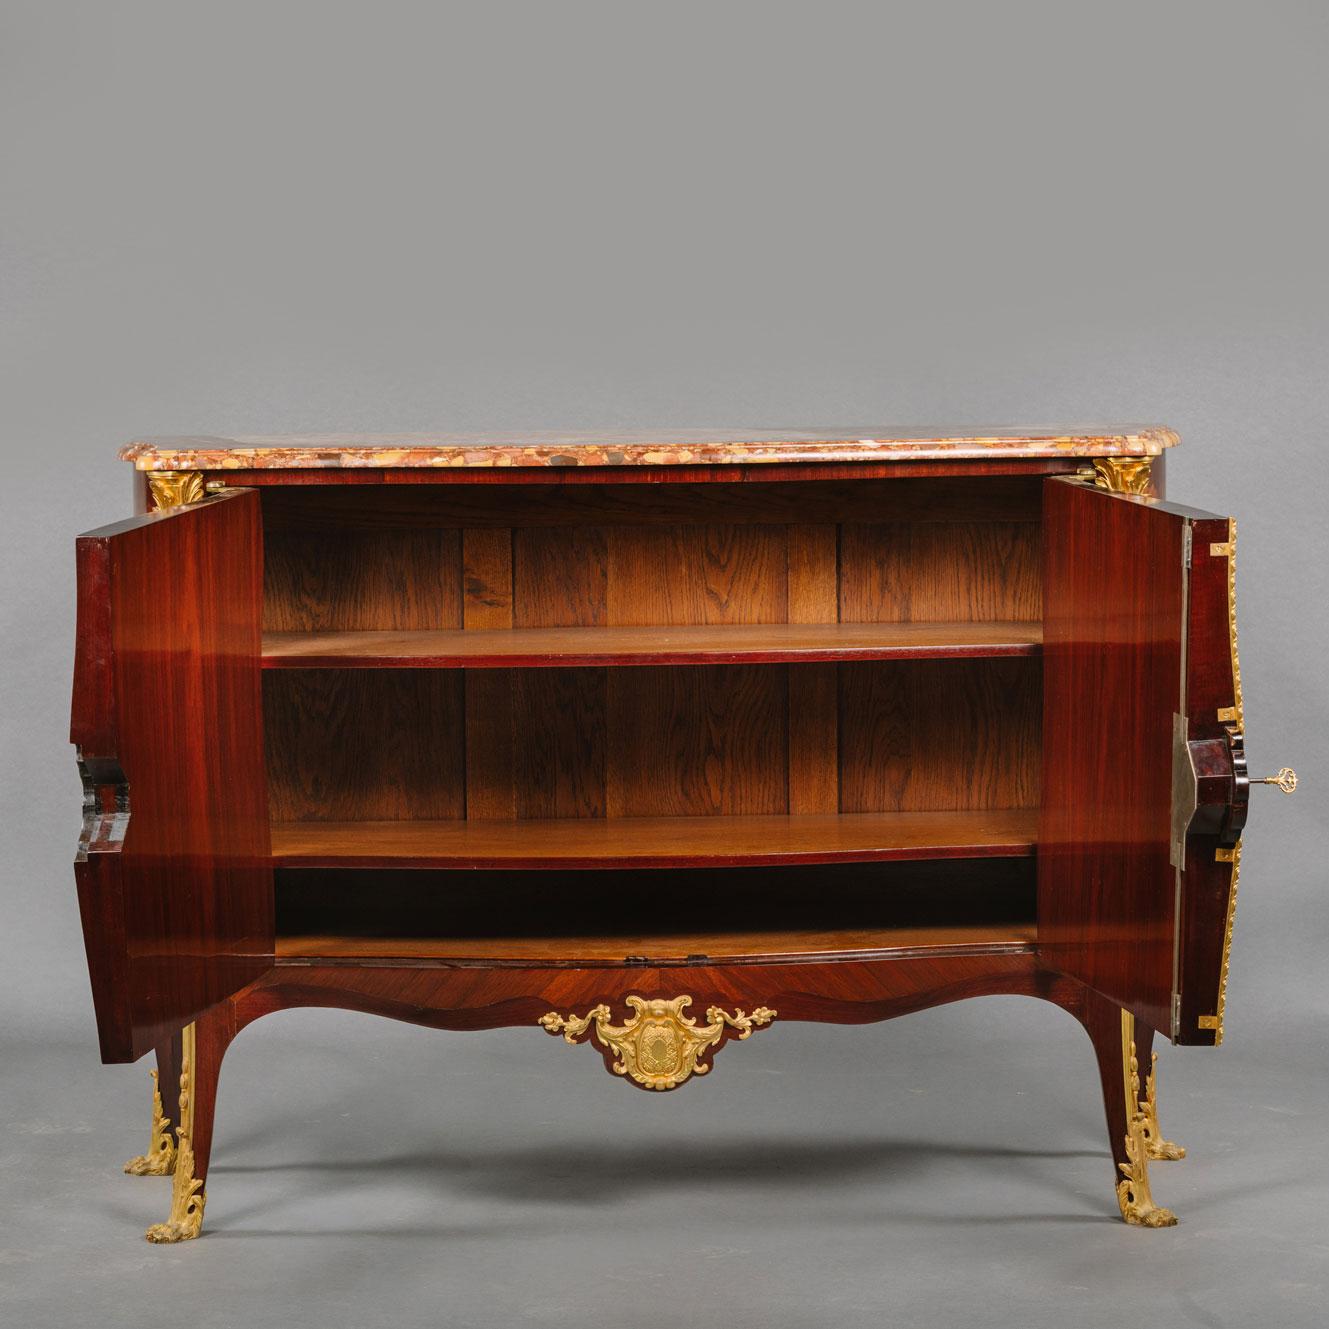 French Fine Louis XV Style Gilt-Bronze Mounted Marquetry Inlaid Commode For Sale